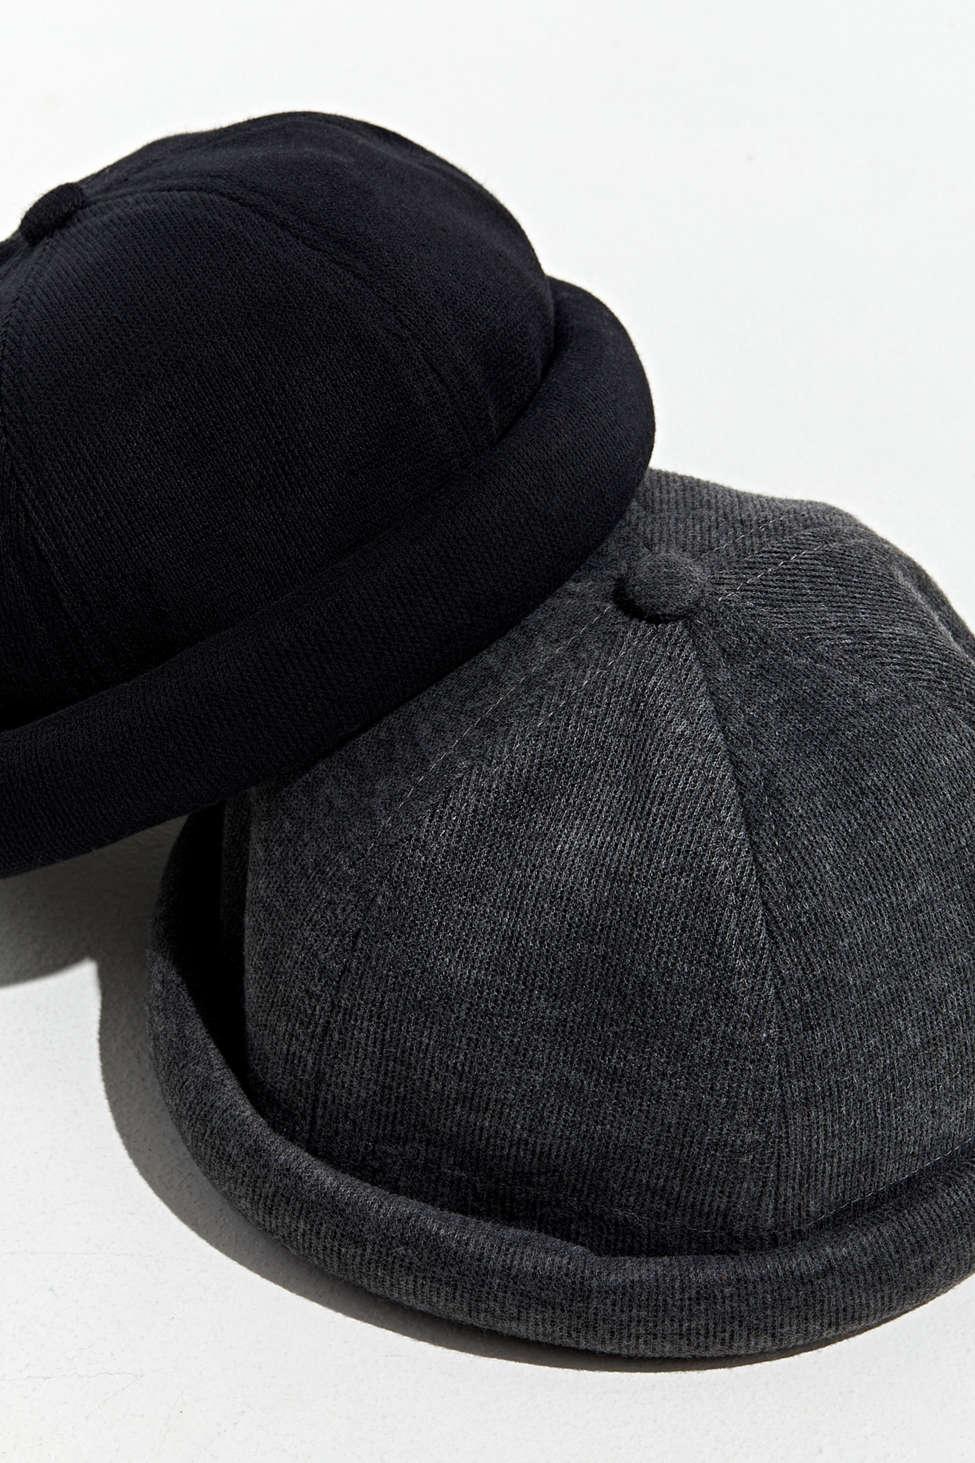 Outfitters Uo Knit Hat for | Lyst